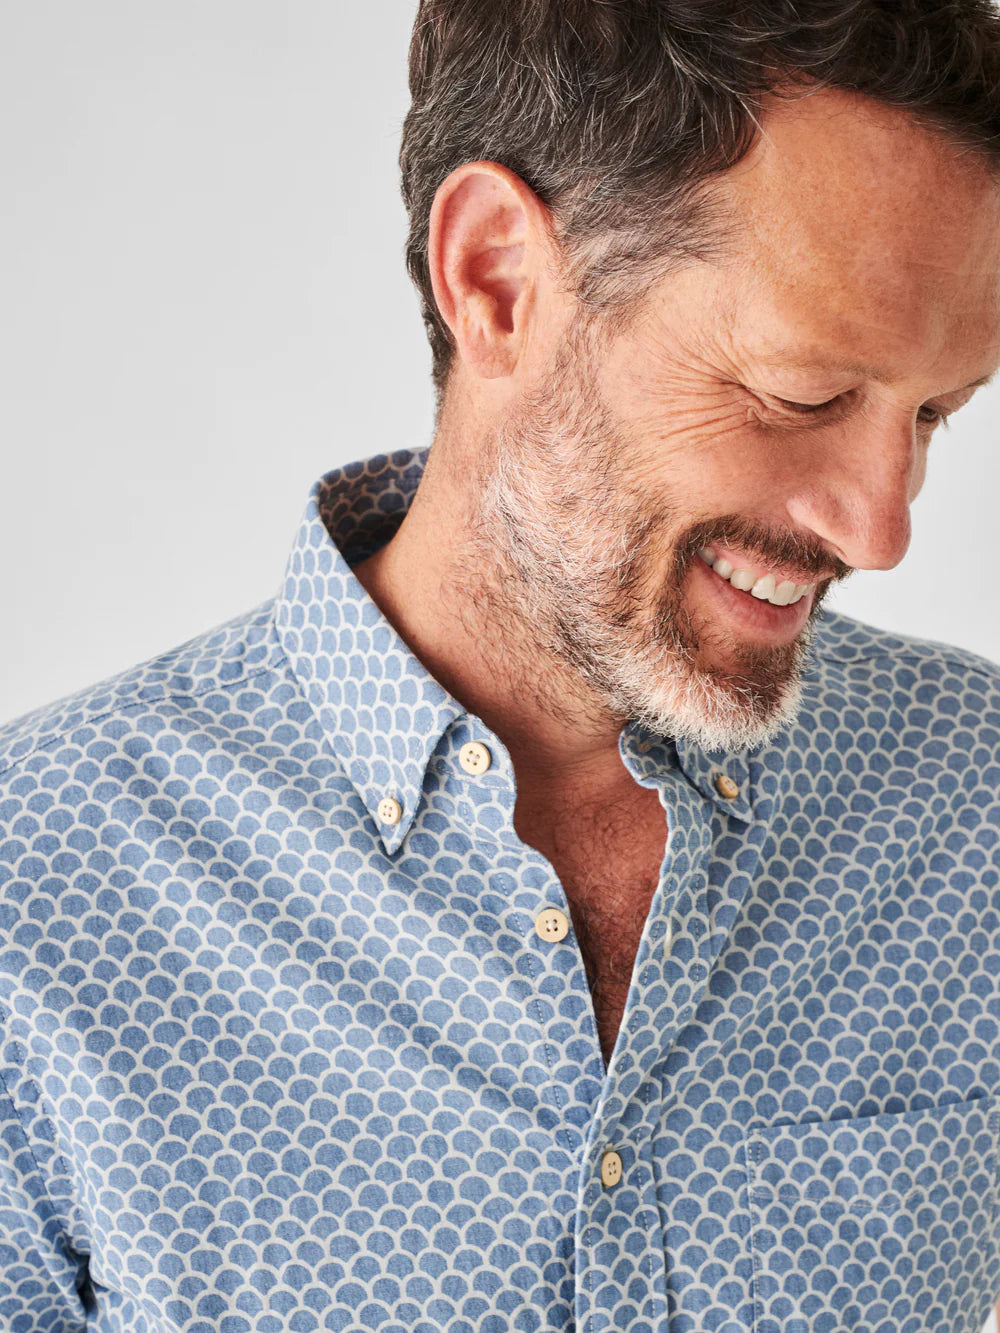 Faherty - FAHERTY SHORT-SLEEVE PLAYA SHIRT IN FISHSCALE REDUX - Rent With Thred